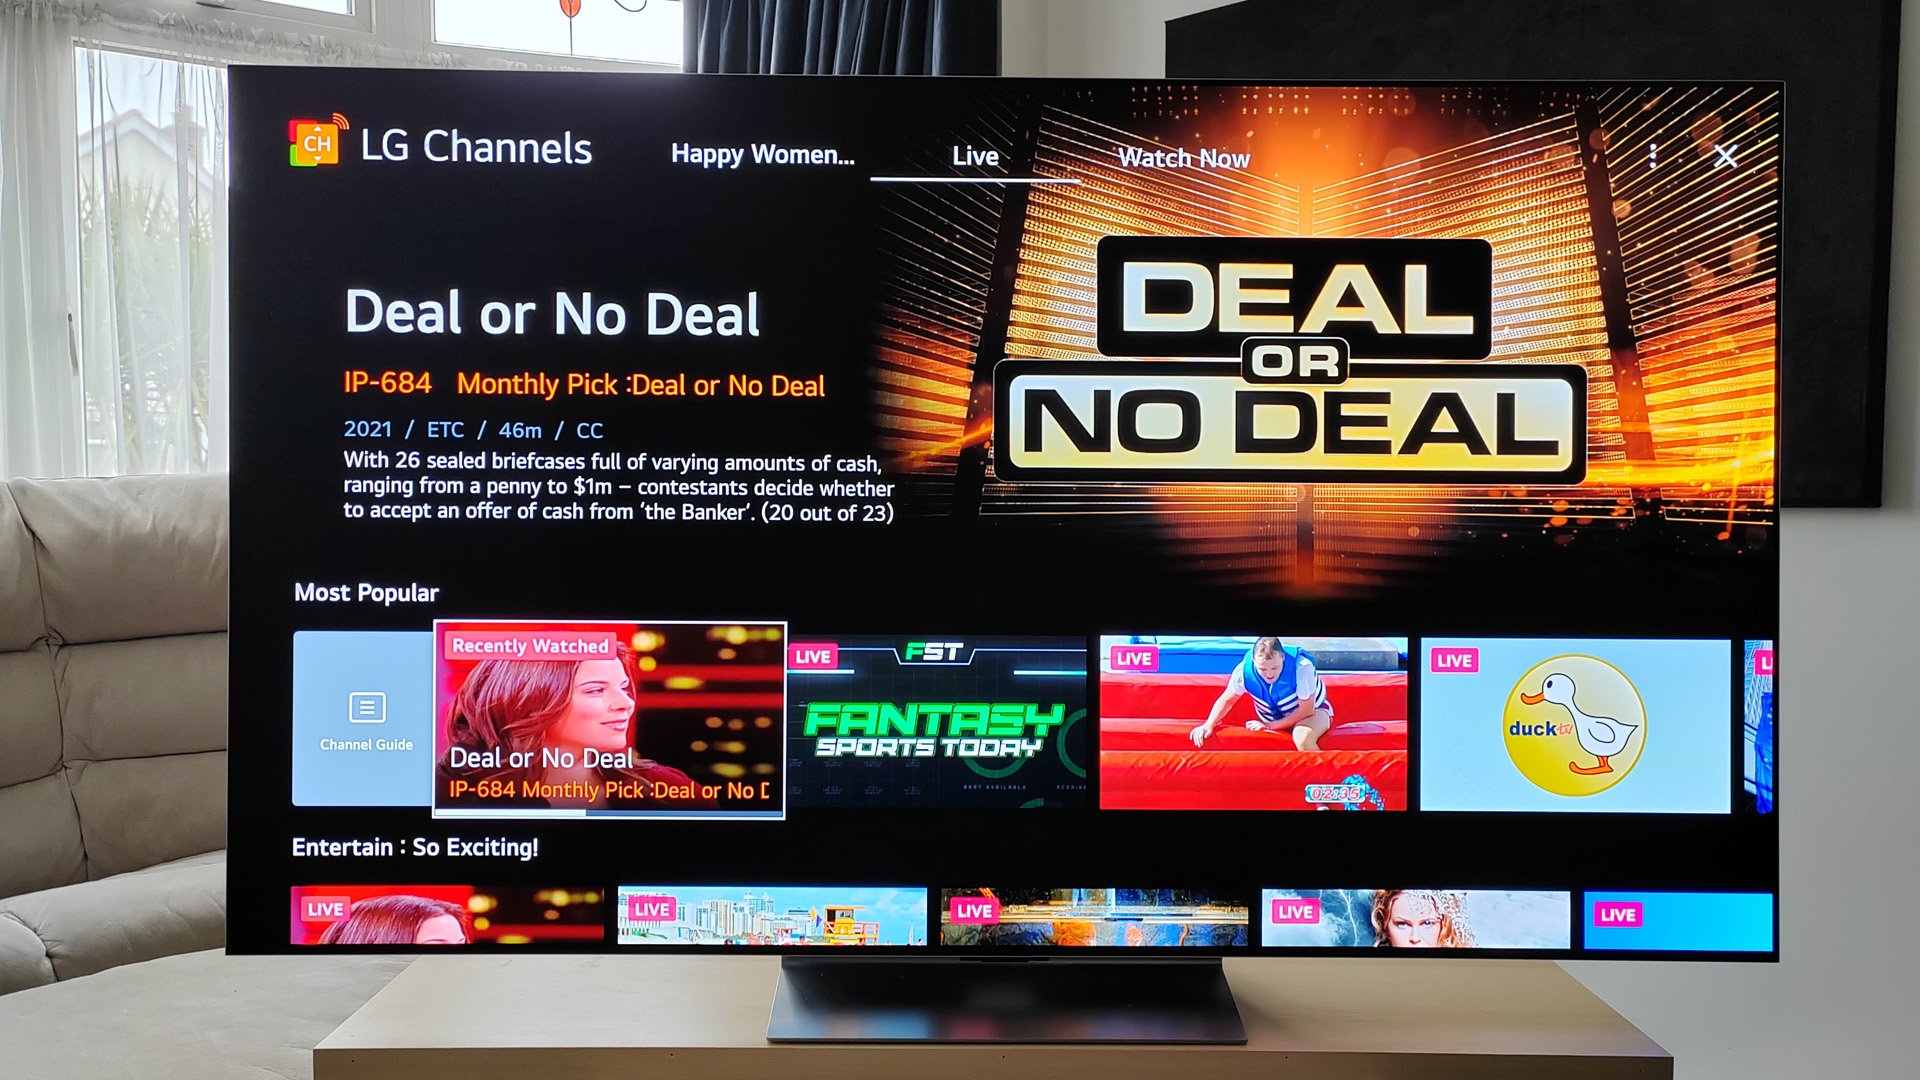 LG OLED G3 review image showing the LG channels you get with the TV